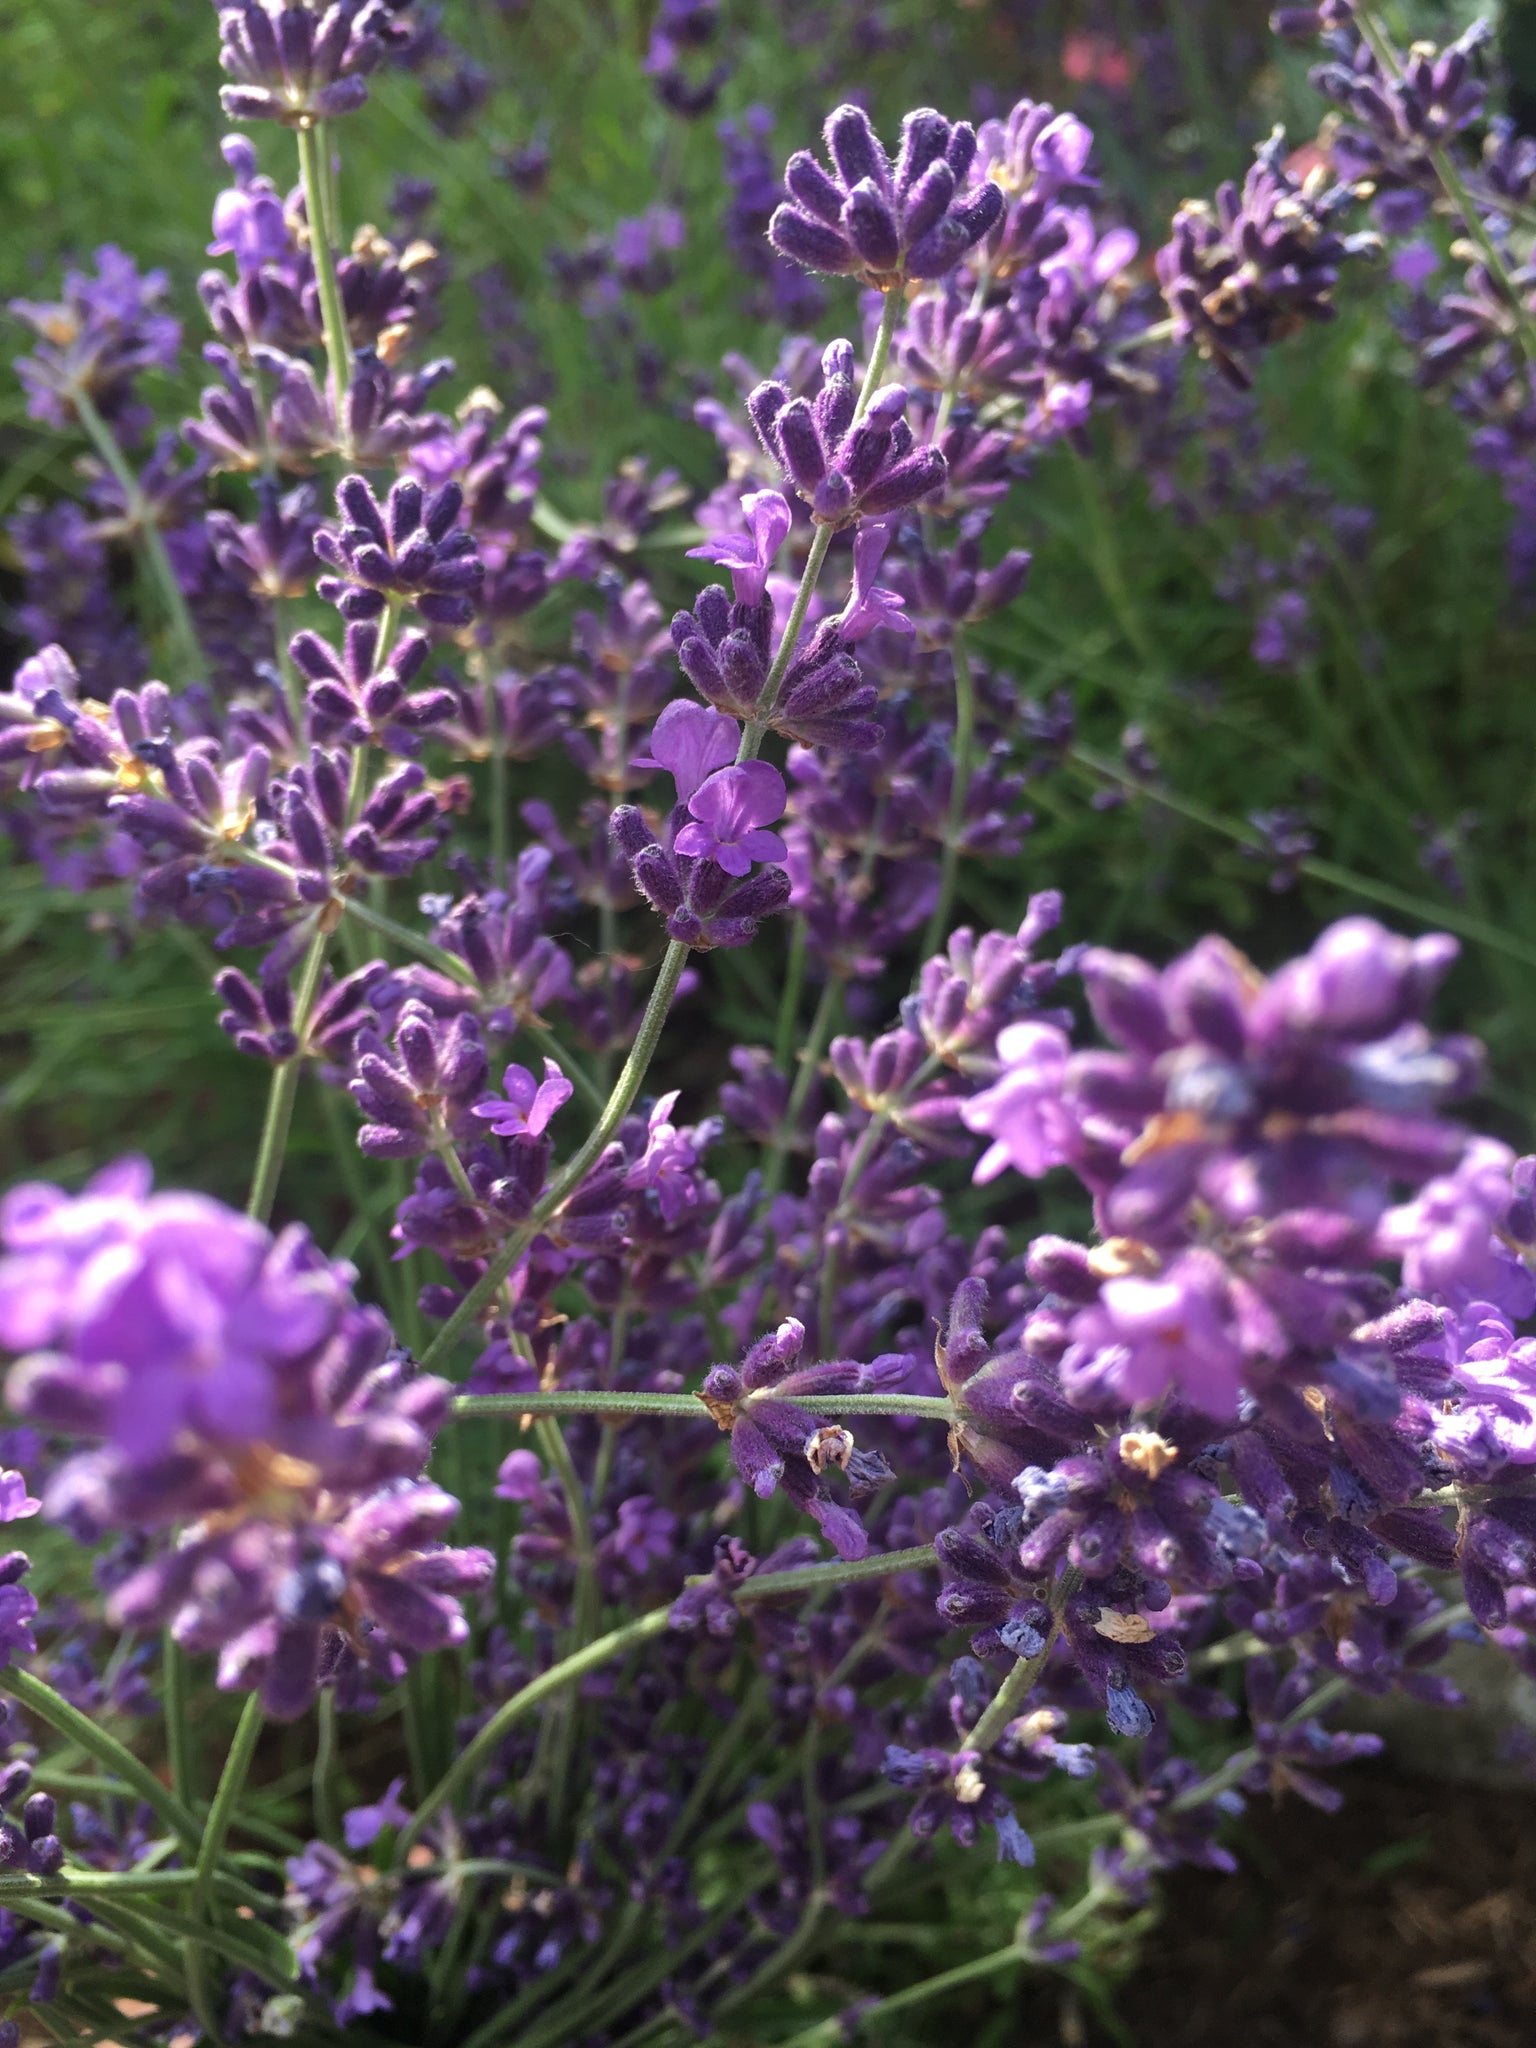 English lavender plant, close-up of flowers